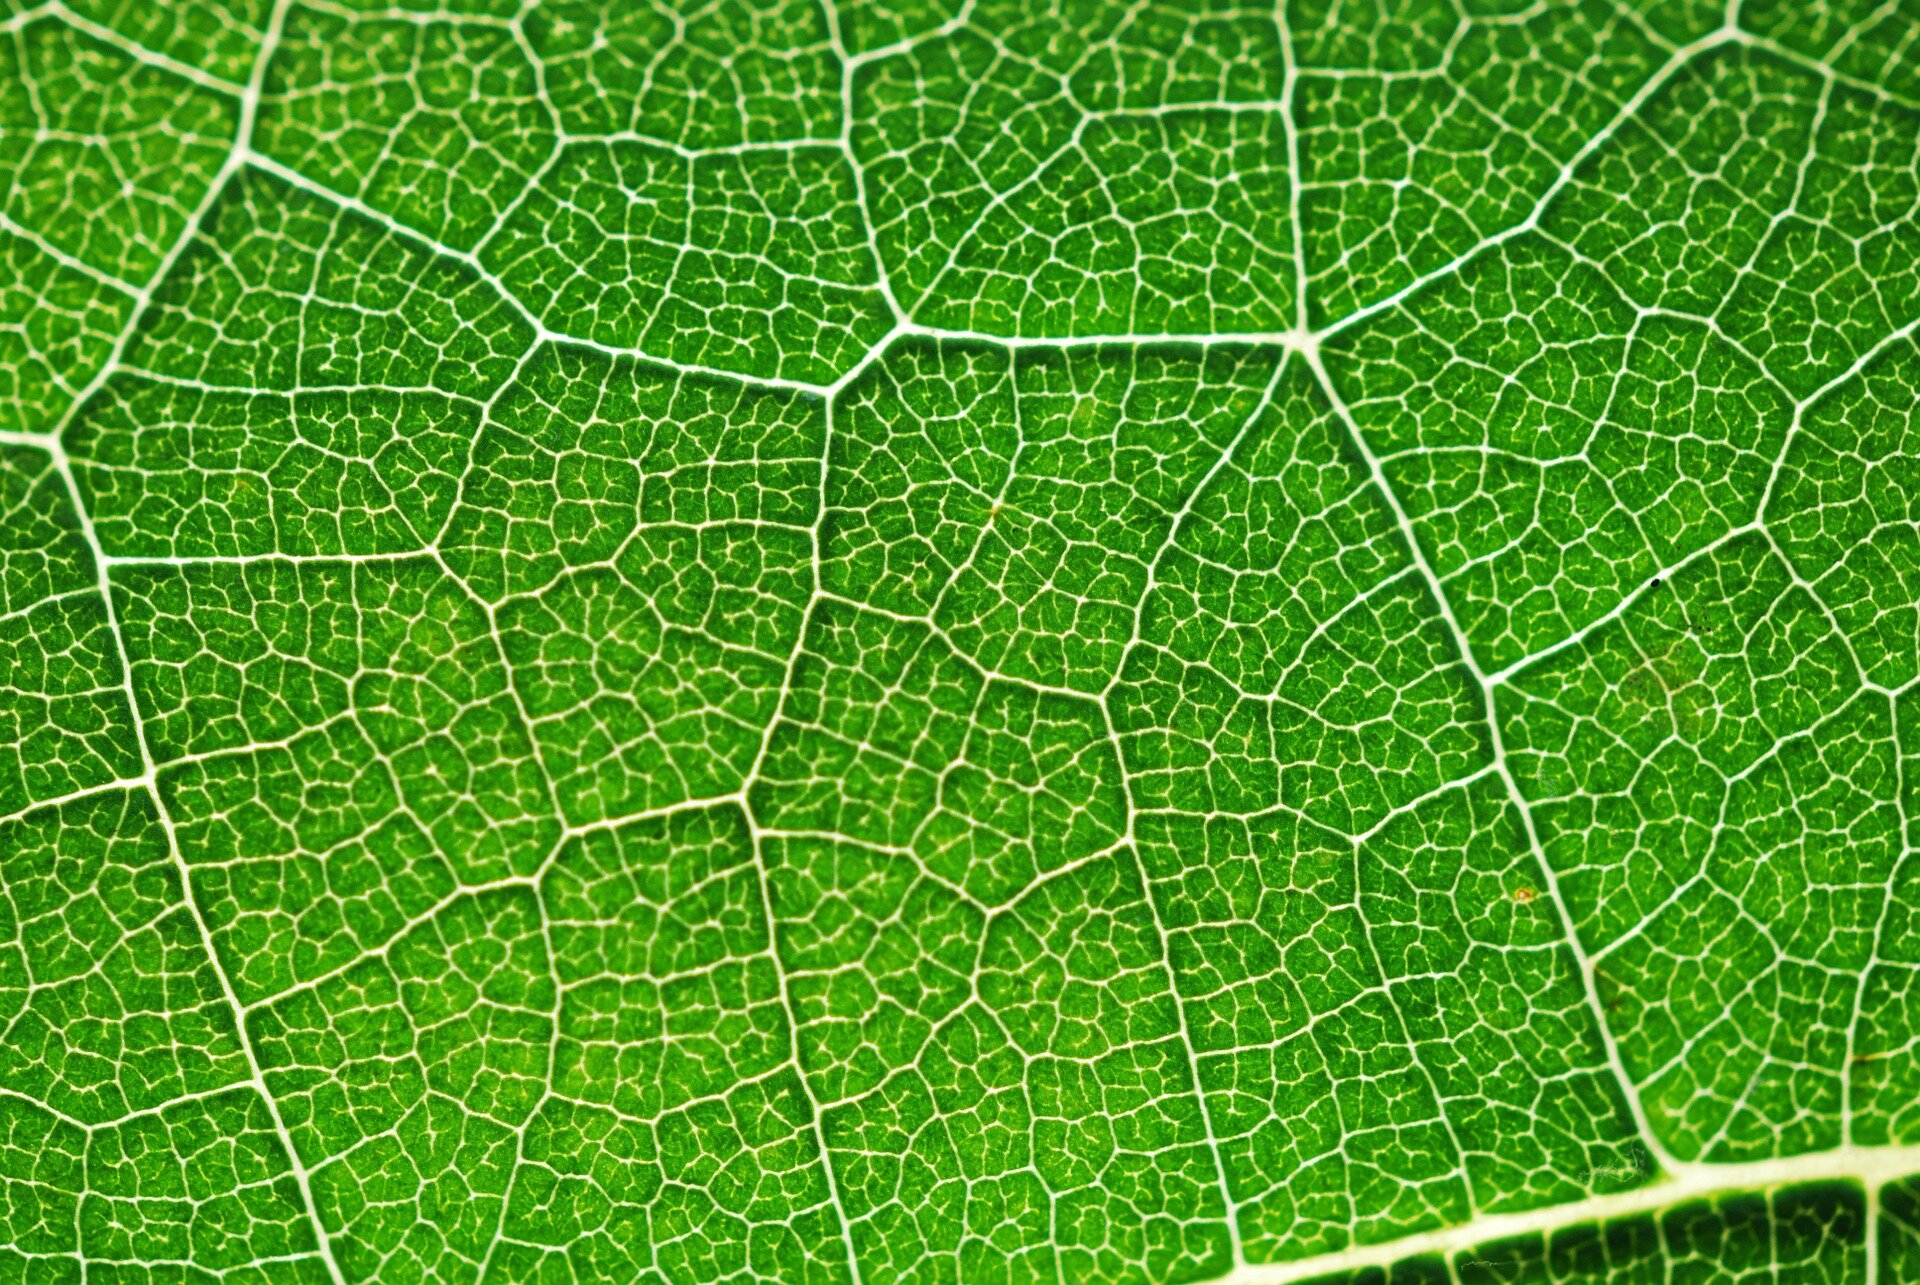 New insight into photosynthesis could help grow more resilient plants